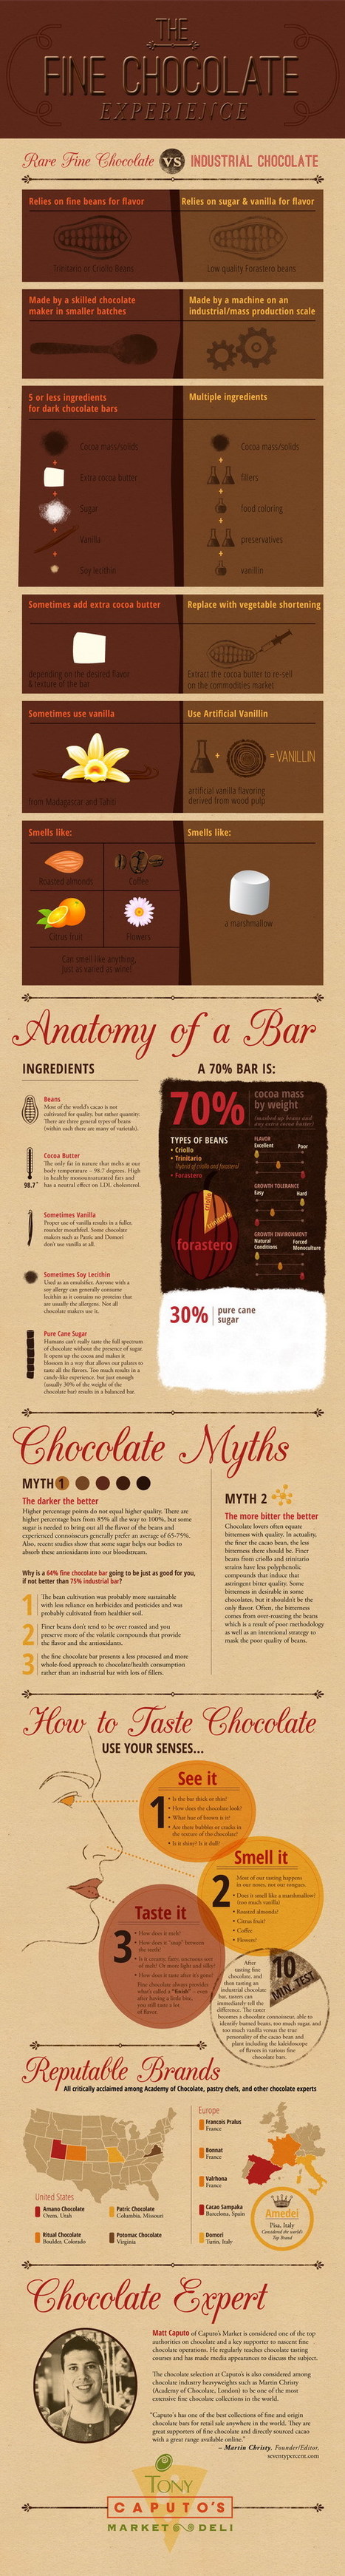 The Fine Chocolate Experience Infographic | Daily Magazine | Scoop.it